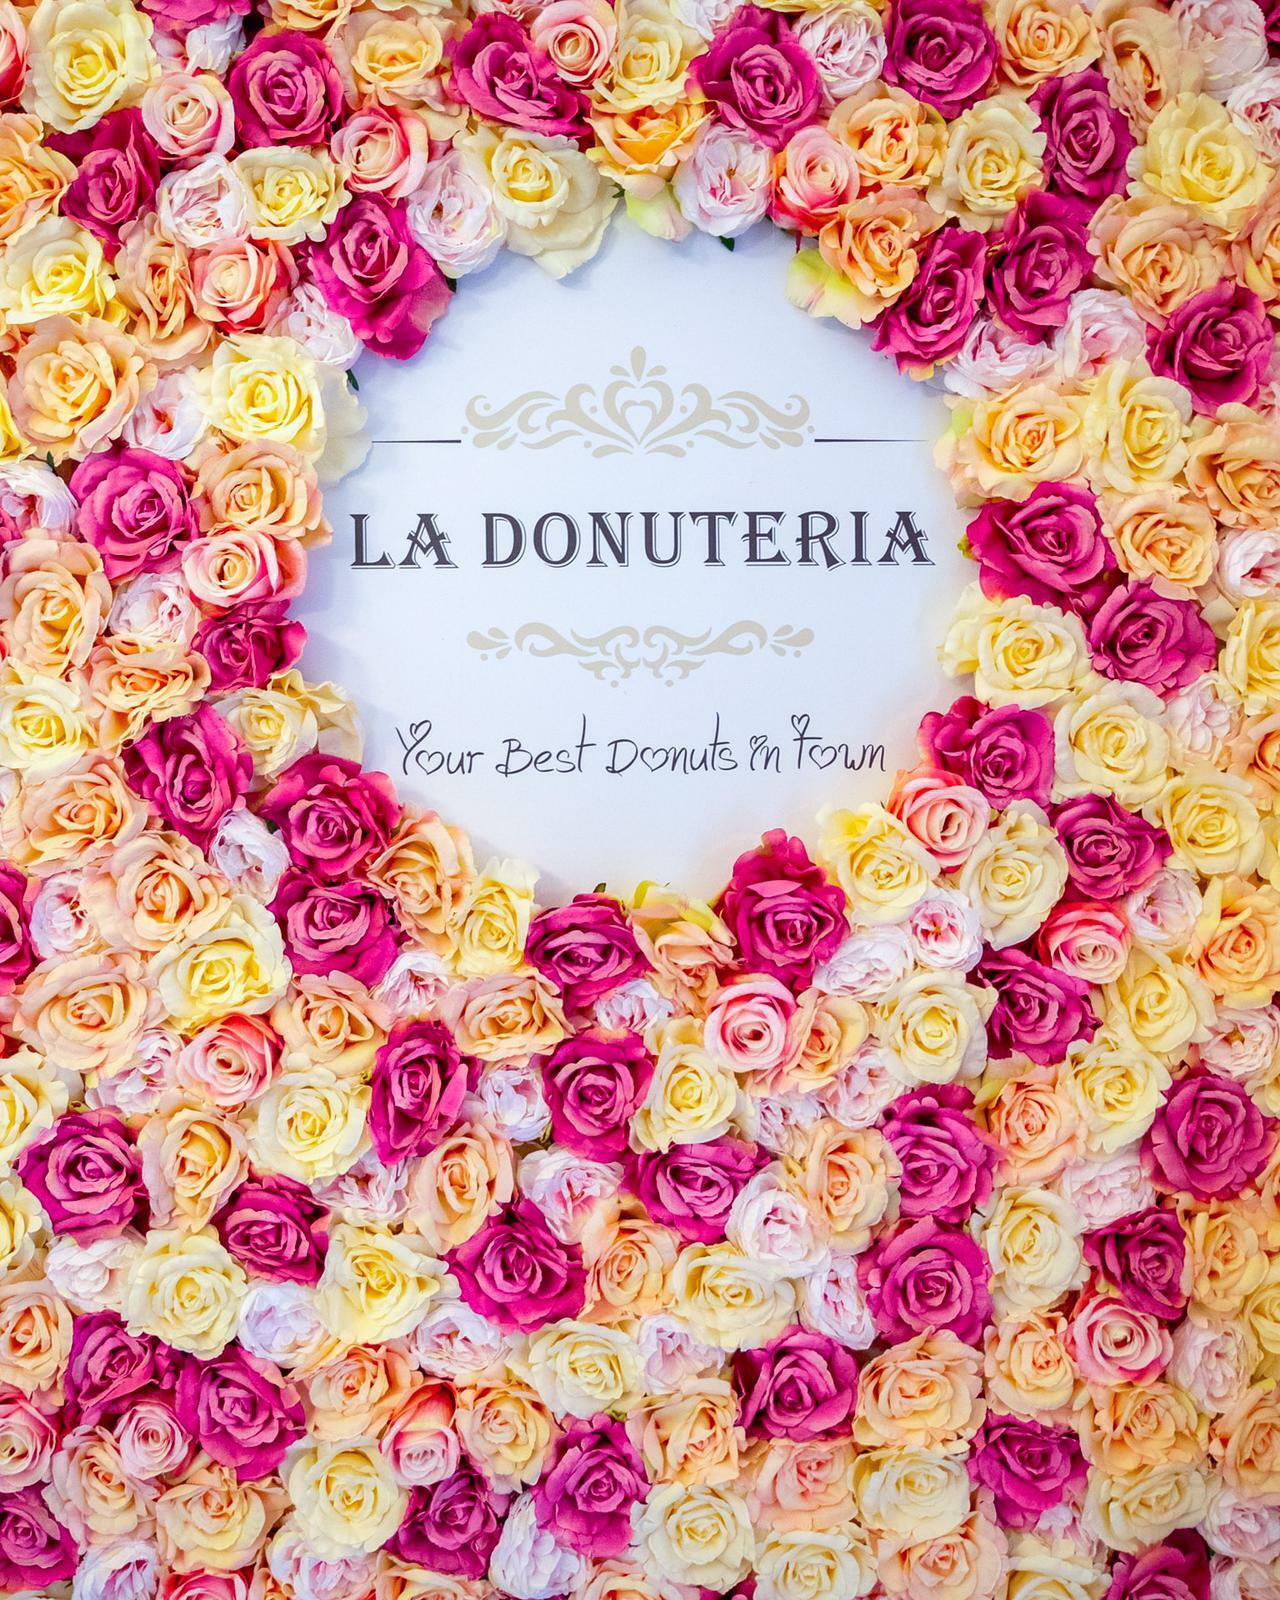 Meet La Donuteria: The largest handmade donuts chain in Europe